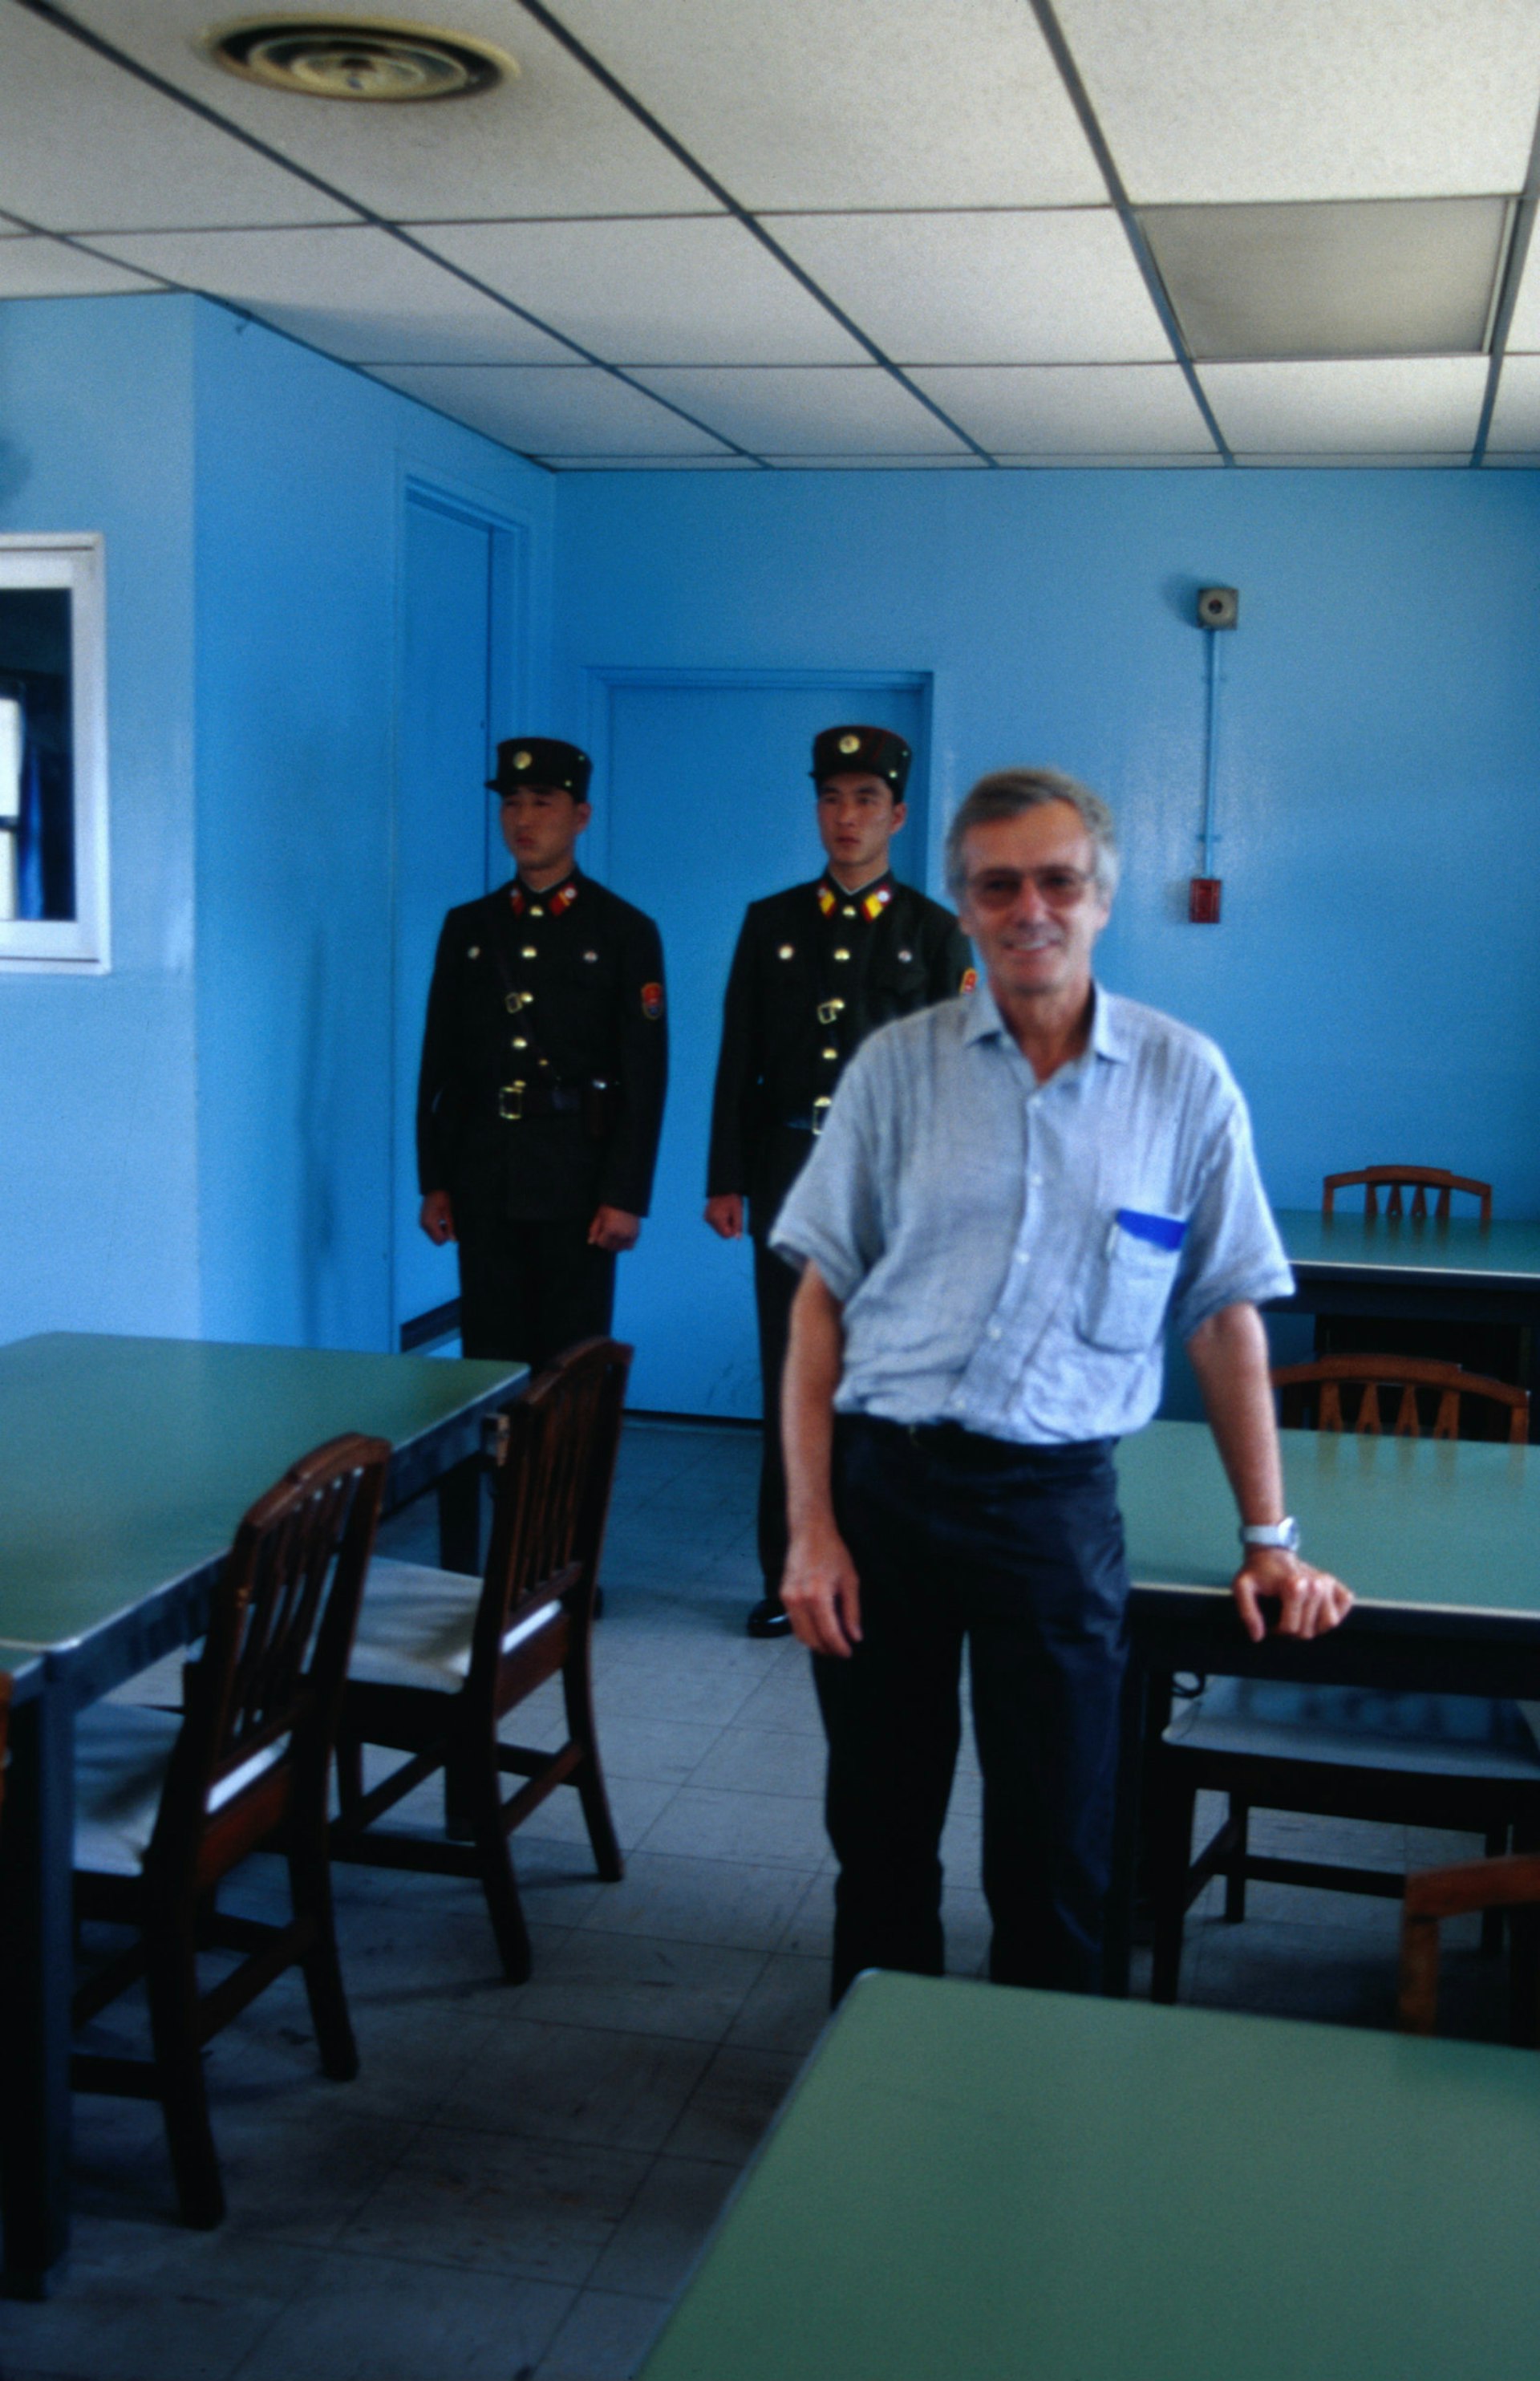 Tony Wheeler's top 10 cities - Tony looking as casual as one can in the DMZ, North Korea © Tony Wheeler / Lonely Planet